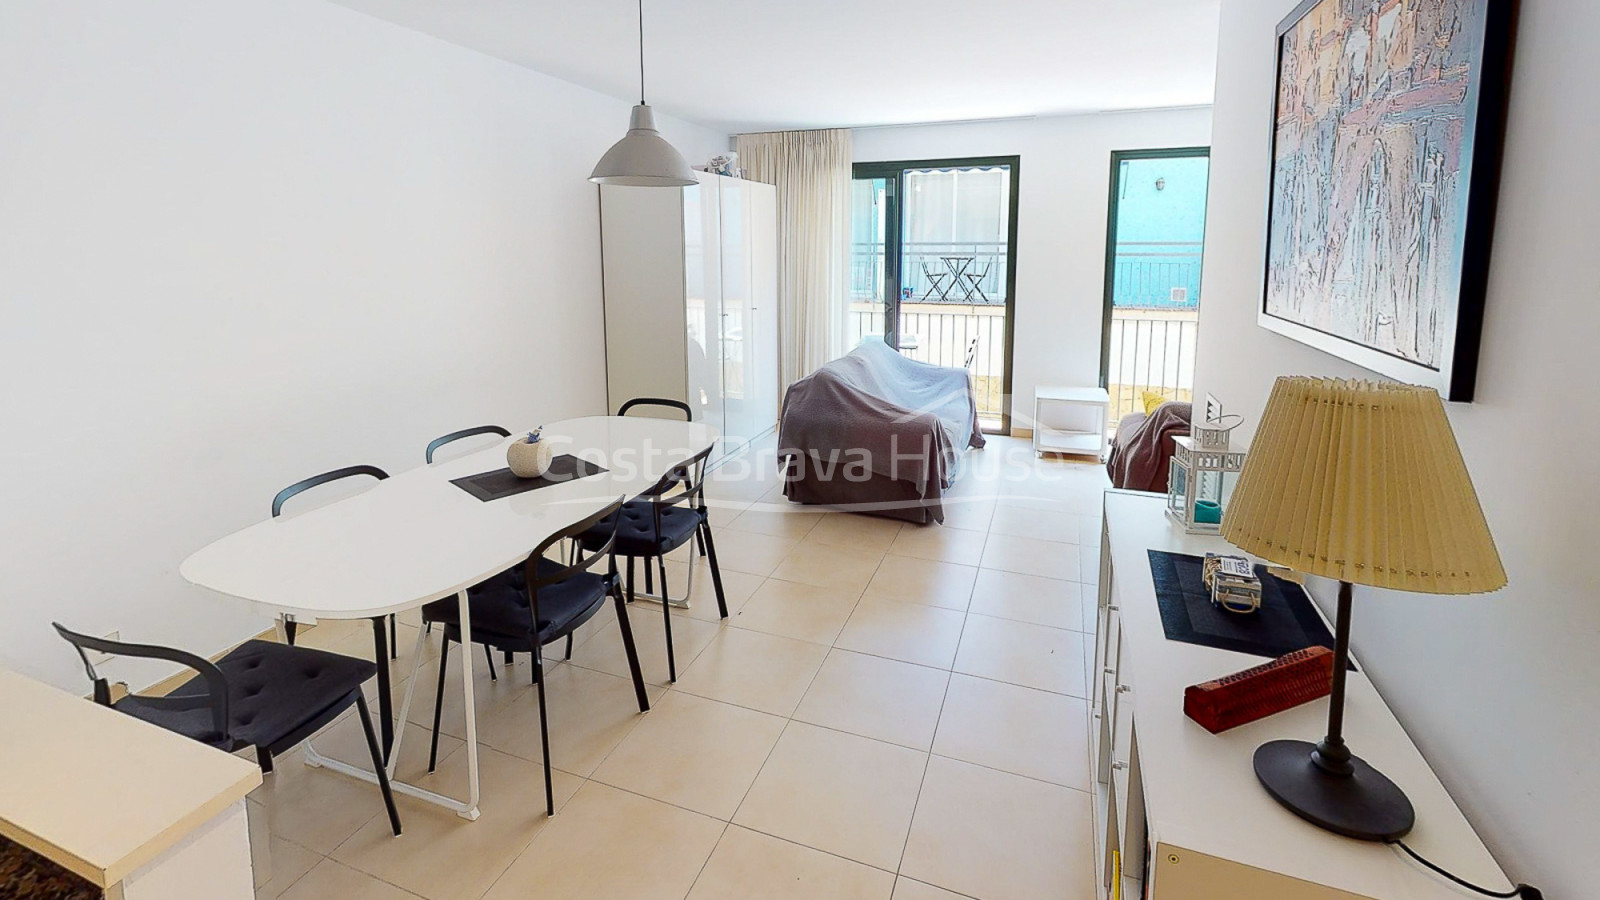 Apartment in perfect condition 1 minute from Tamariu beach